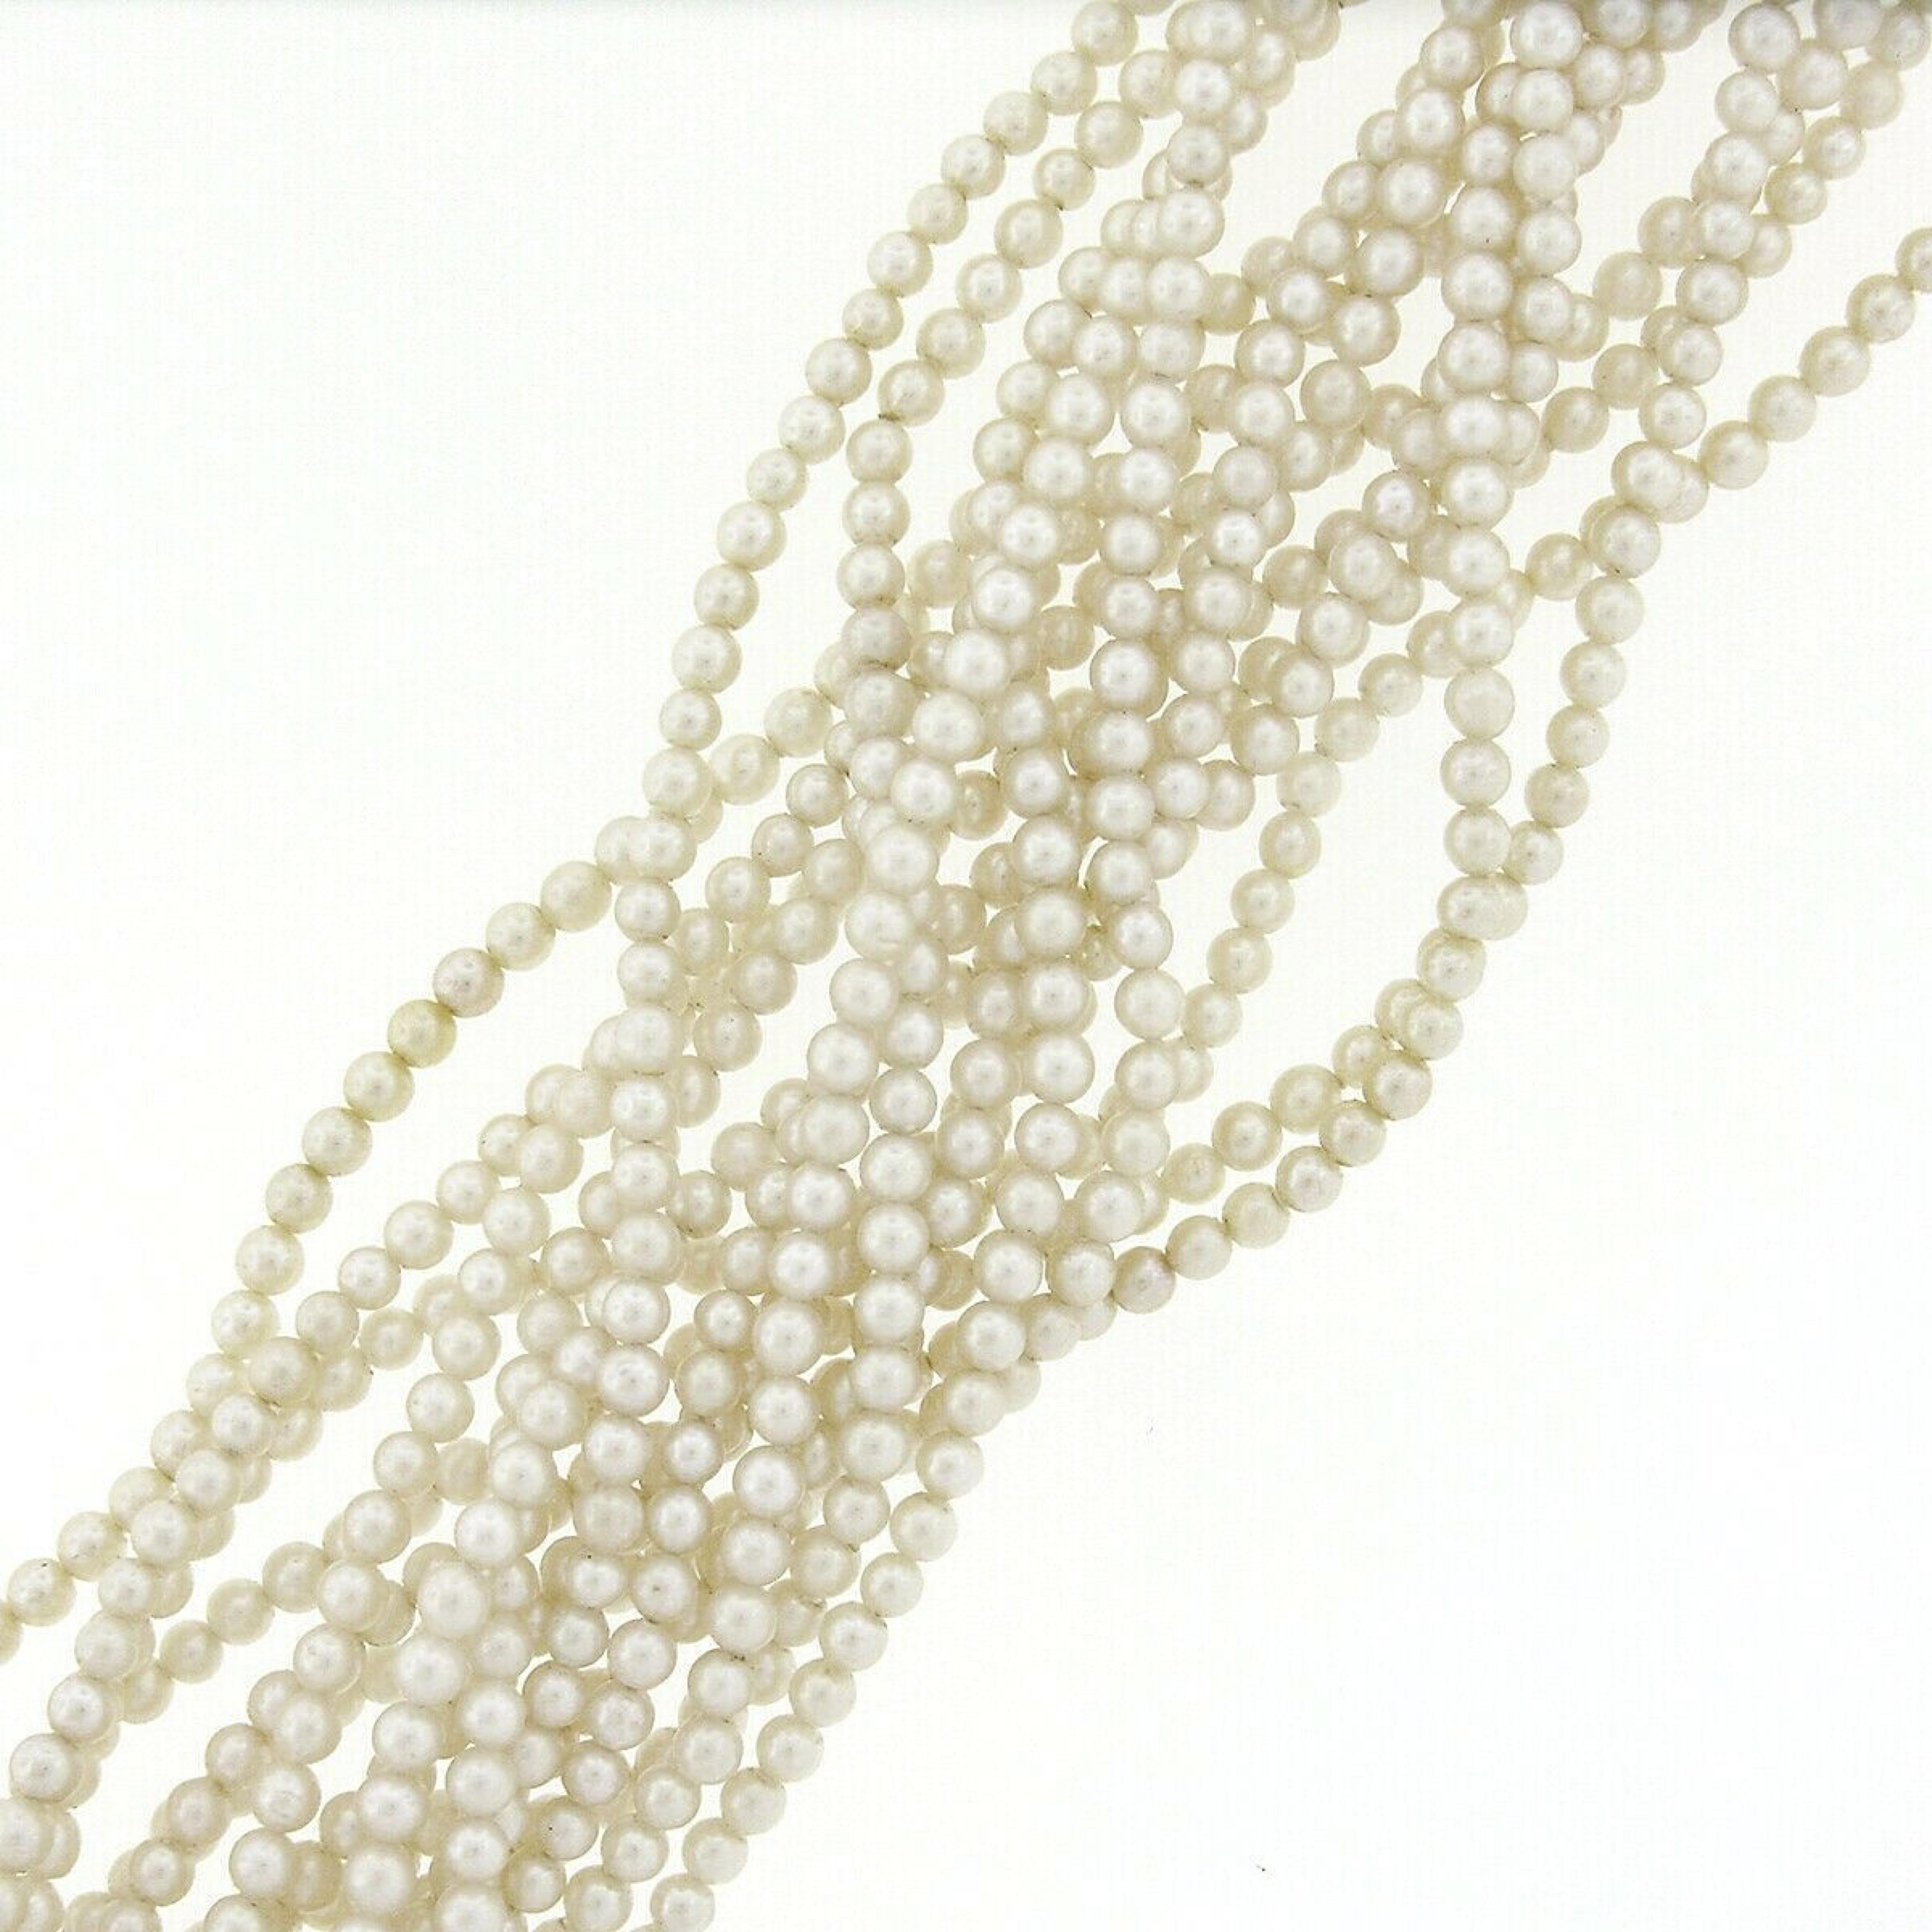 Women's Denise Roberge Multistrand Akoya Pearl Necklace W/ 22k Gold Diamond Ends & Clasp